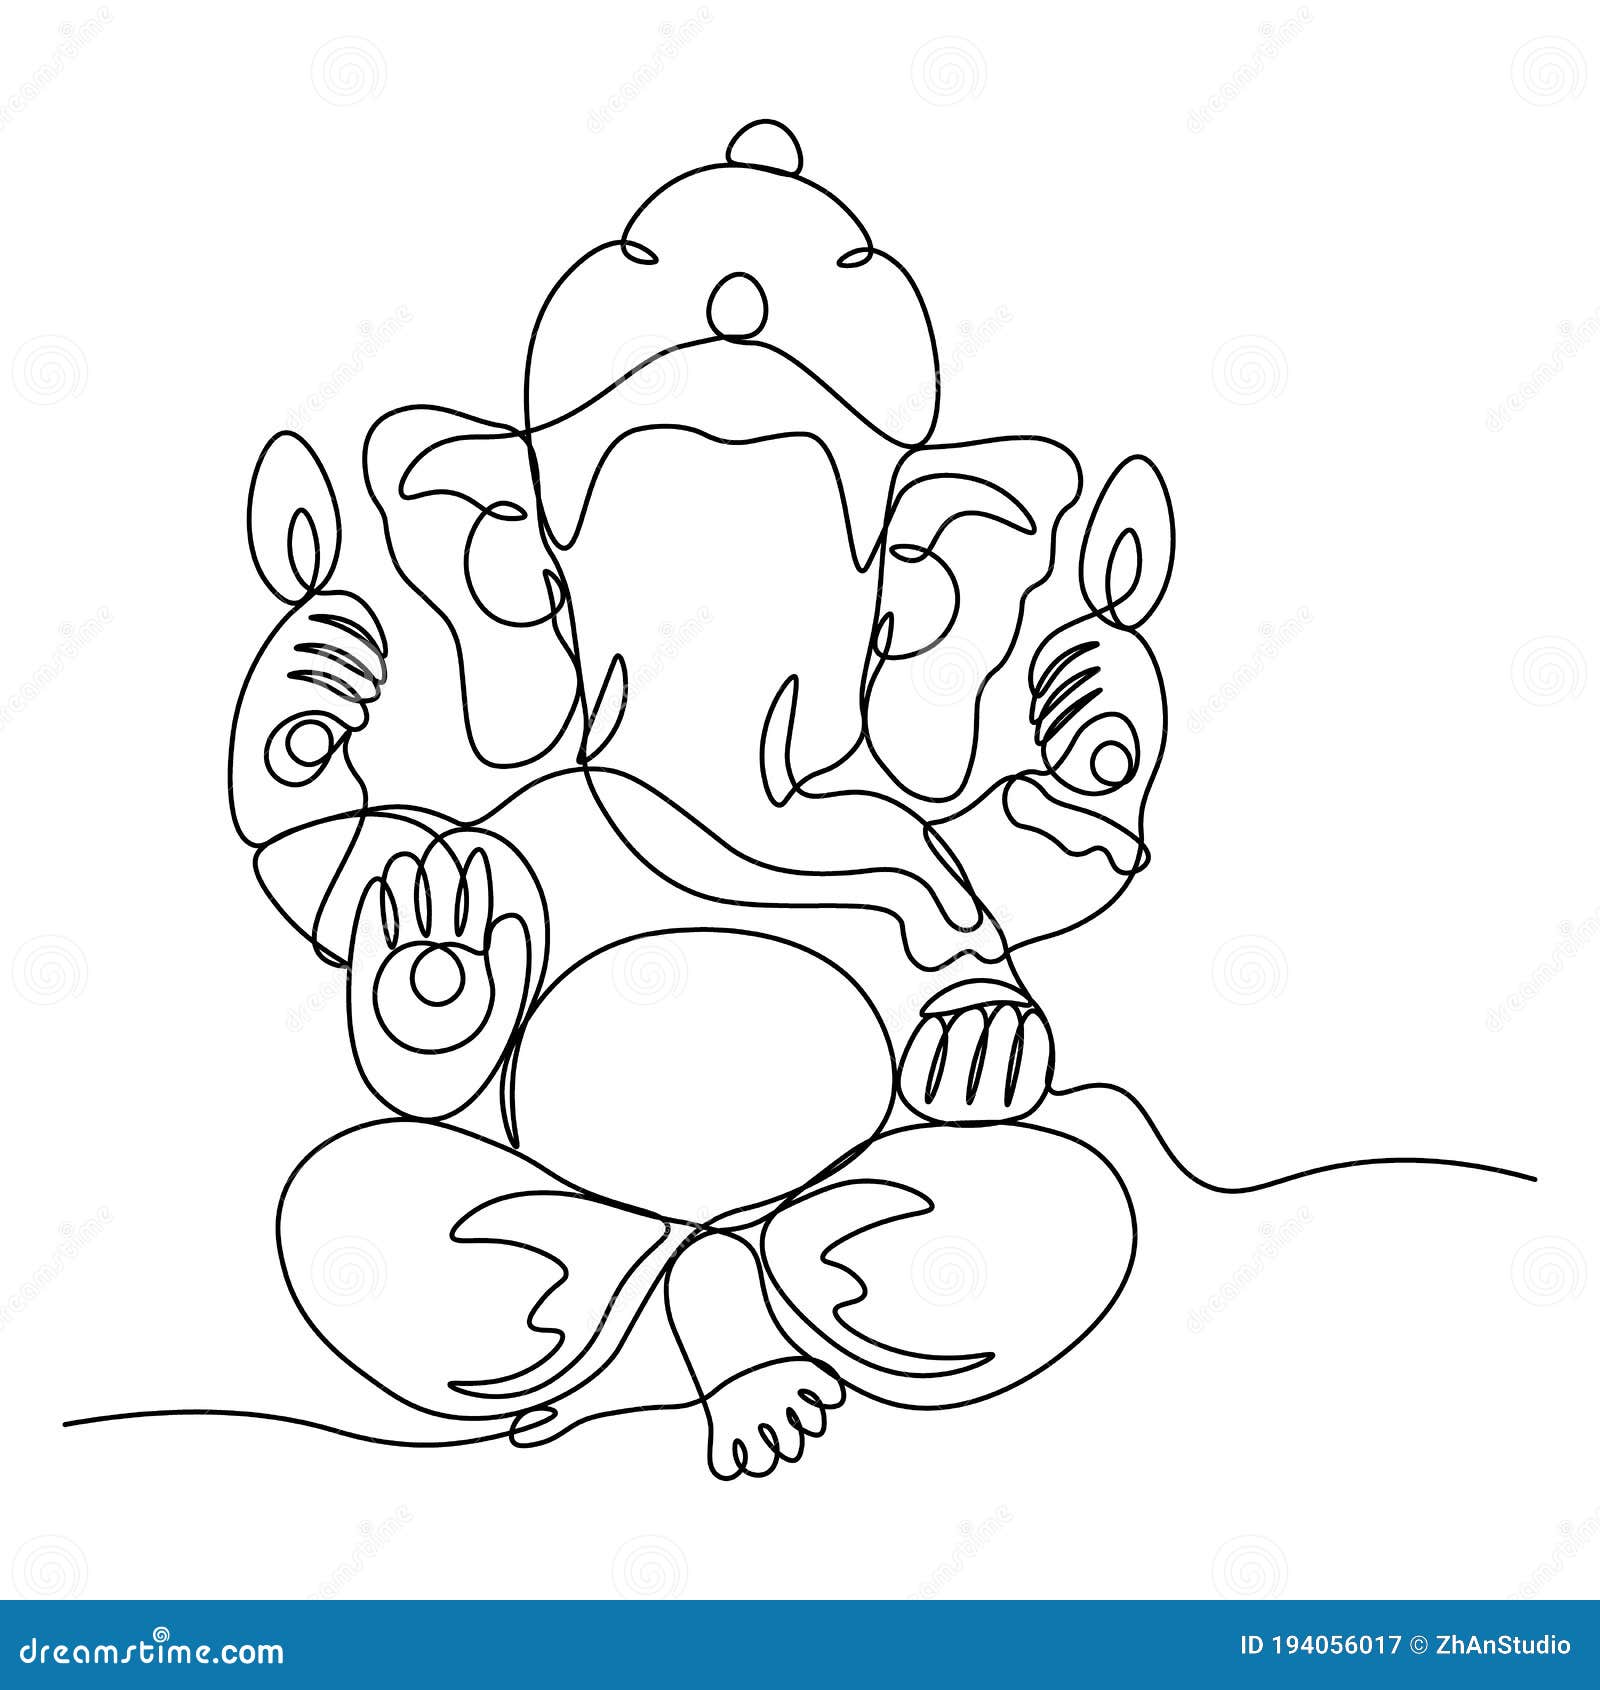 Drawing or sketch of lord ganesha outline and silhouette editable wall  mural • murals outline, line art, wedding | myloview.com